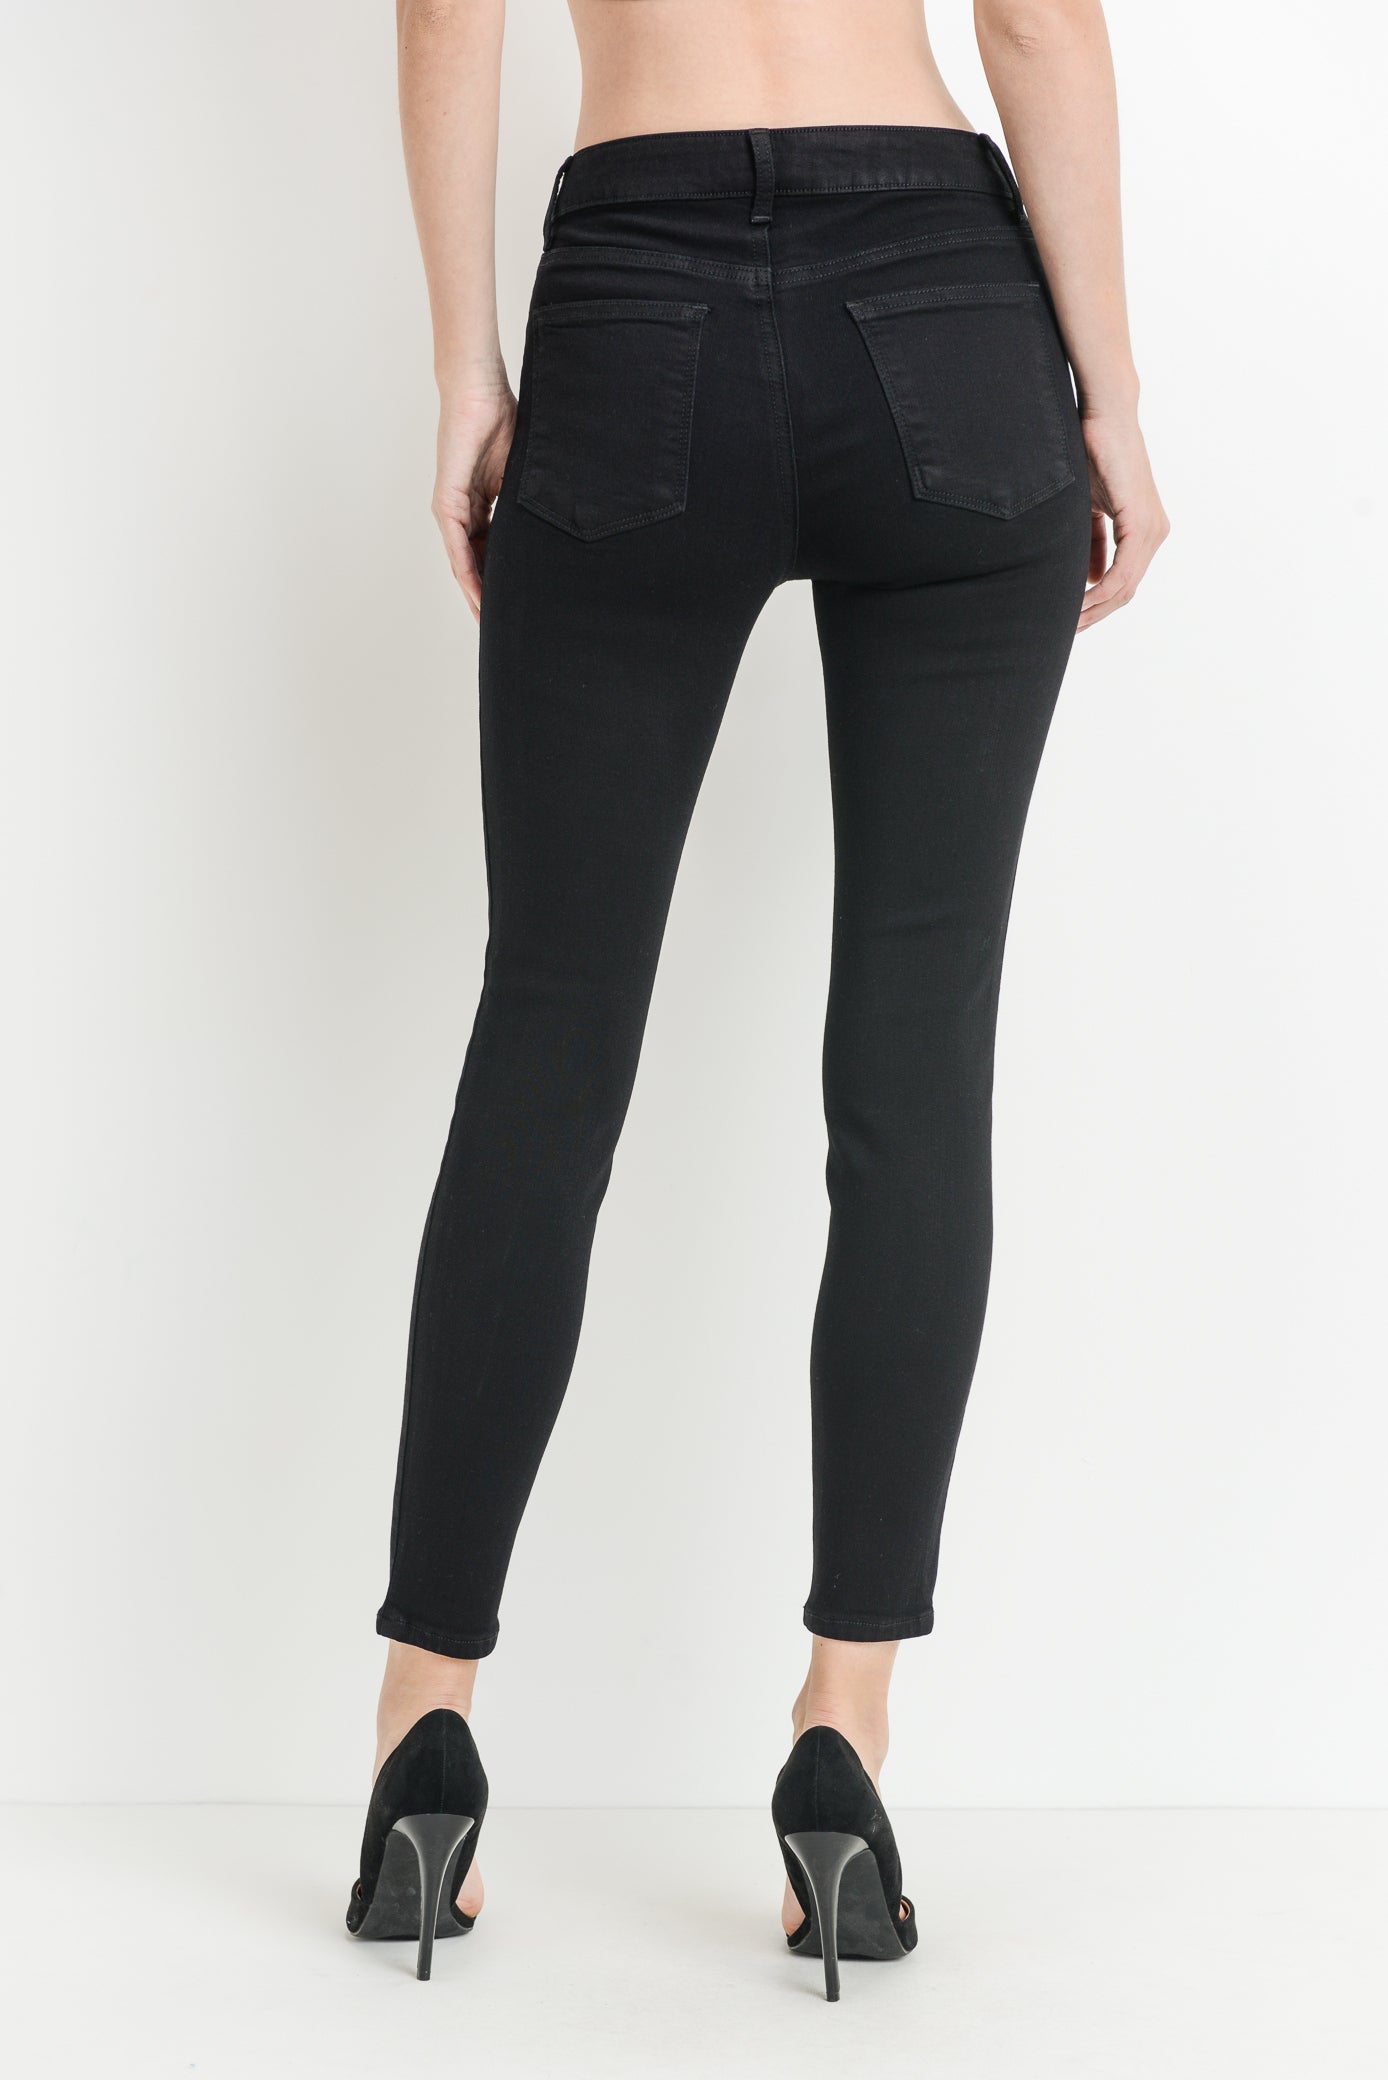 High Rise Black Skinny Jeans at Maria Vincent Boutique